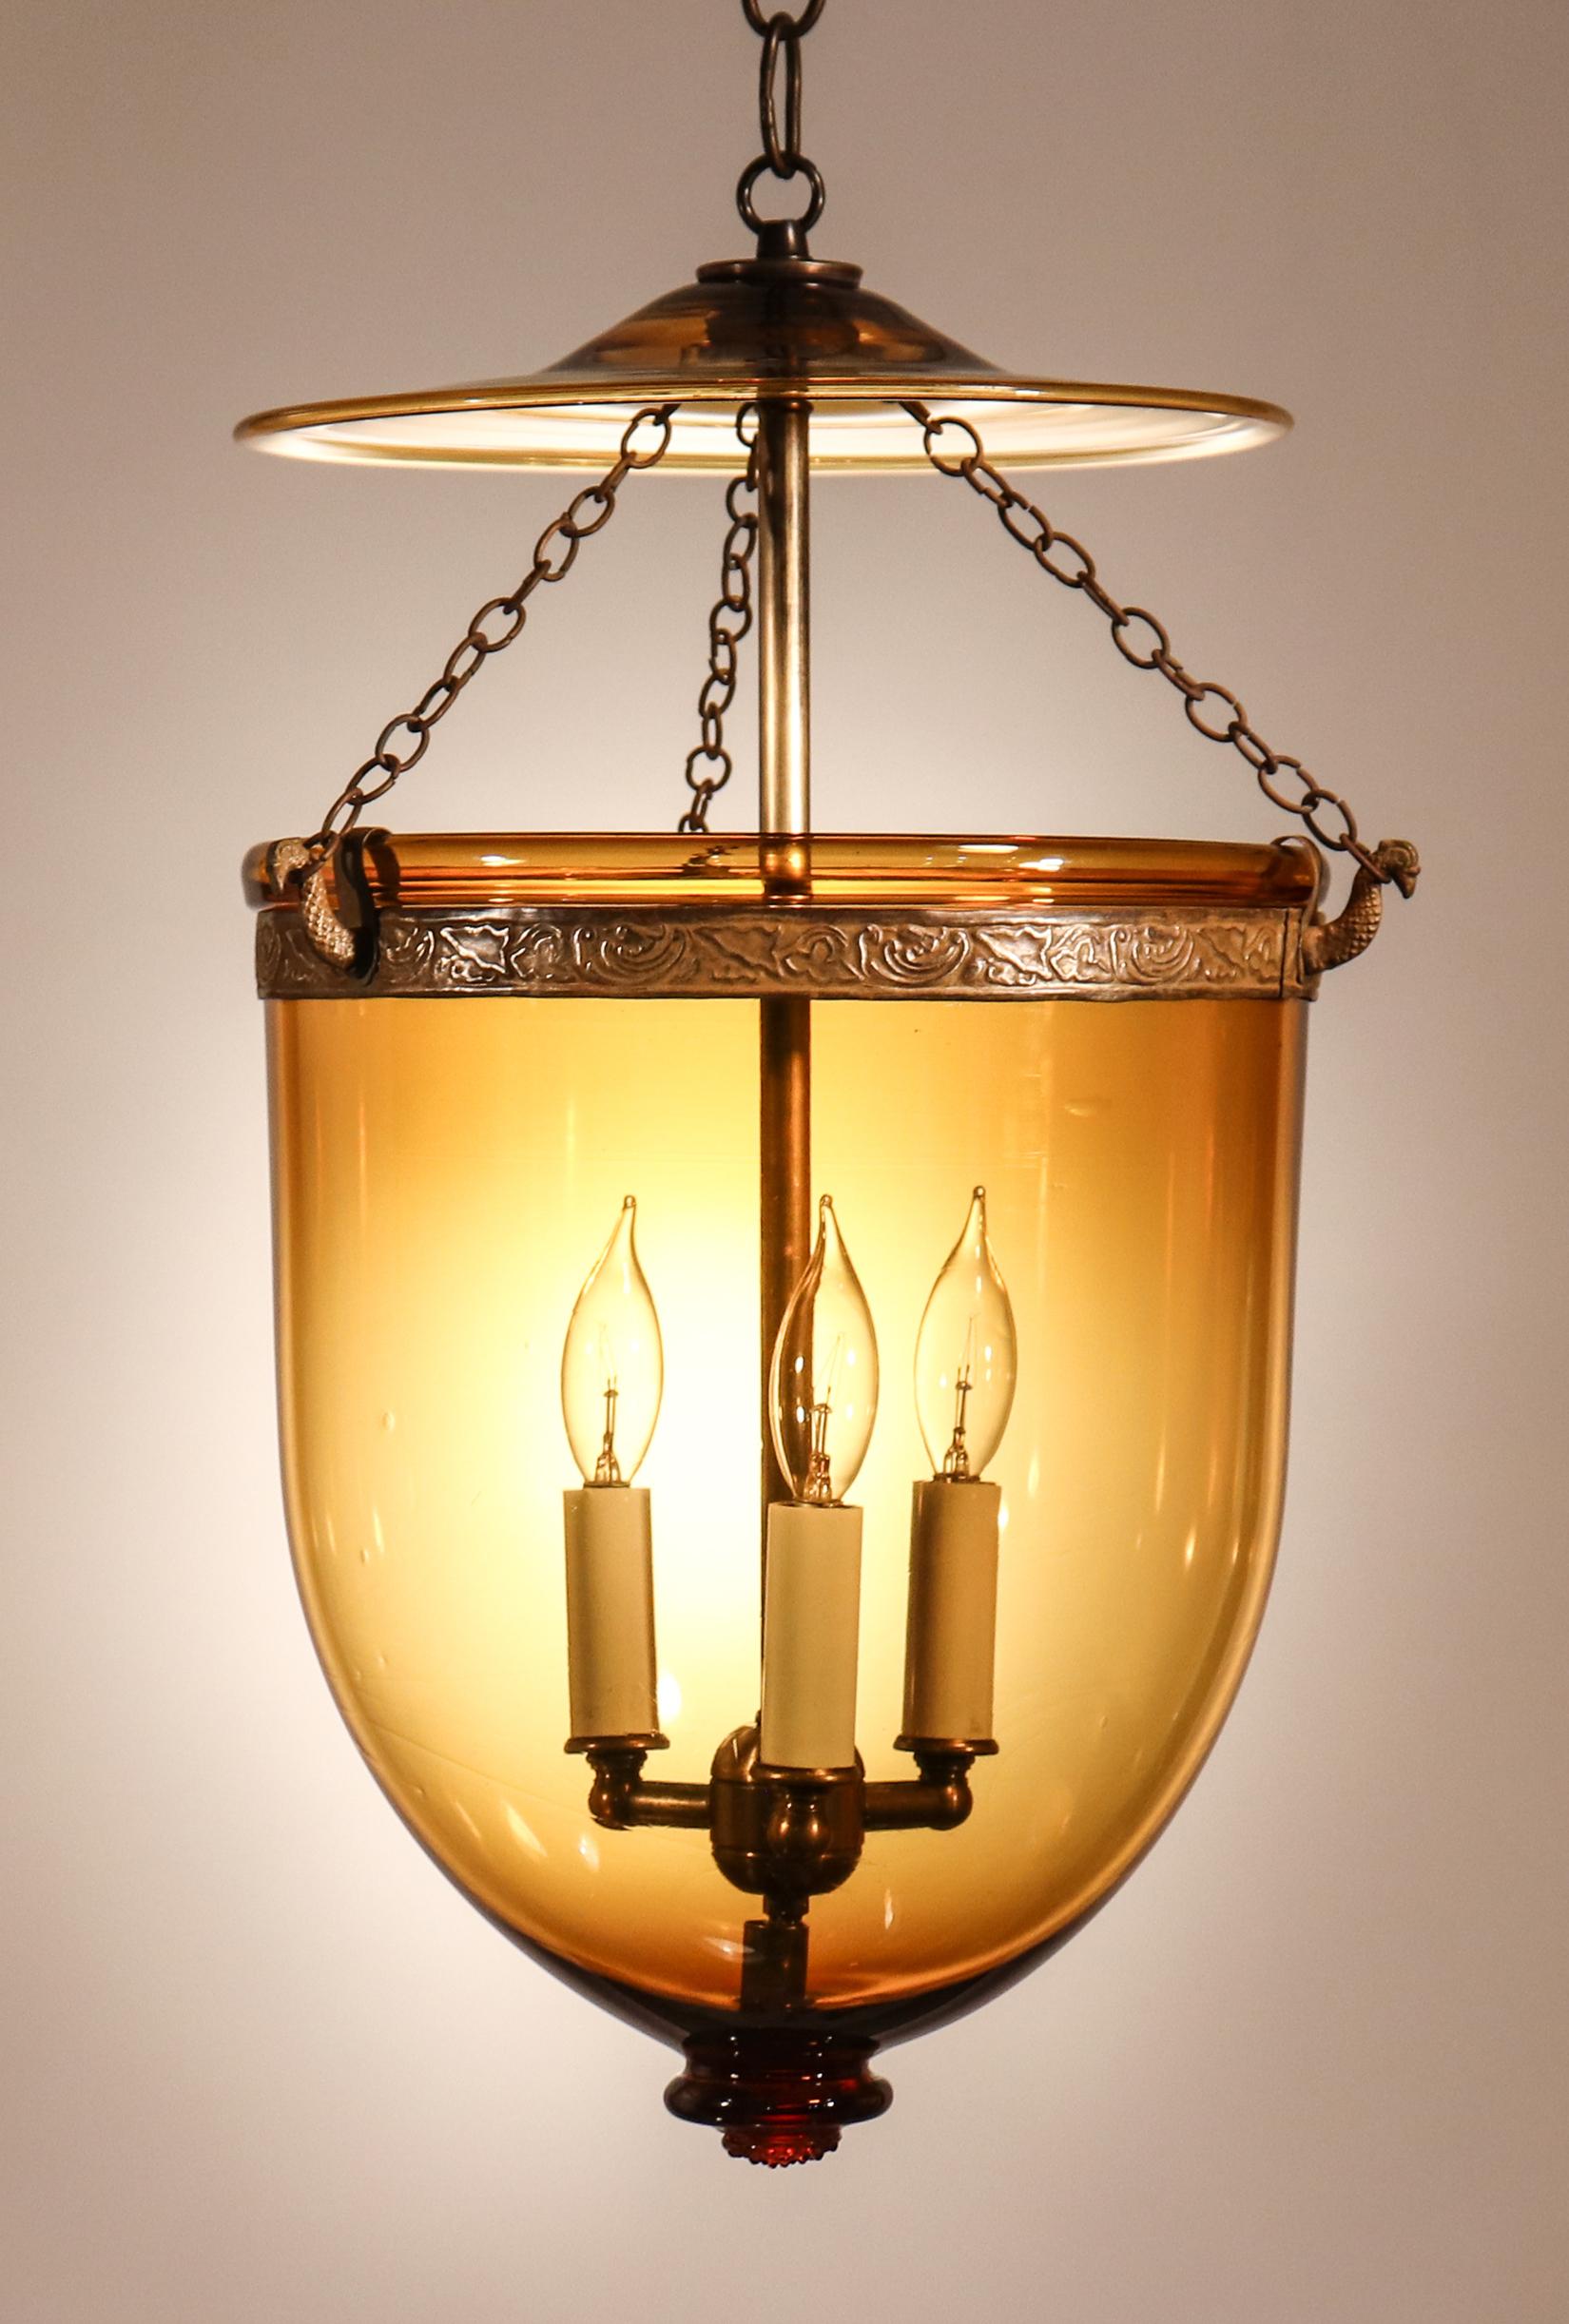 A rich amber-colored bell jar lantern with its original smoke bell and a decorated brass band with embossed vine design. The quality of this circa 1880 lantern is excellent, with desirable air bubbles and swirls in the hand blown glass. The pendant